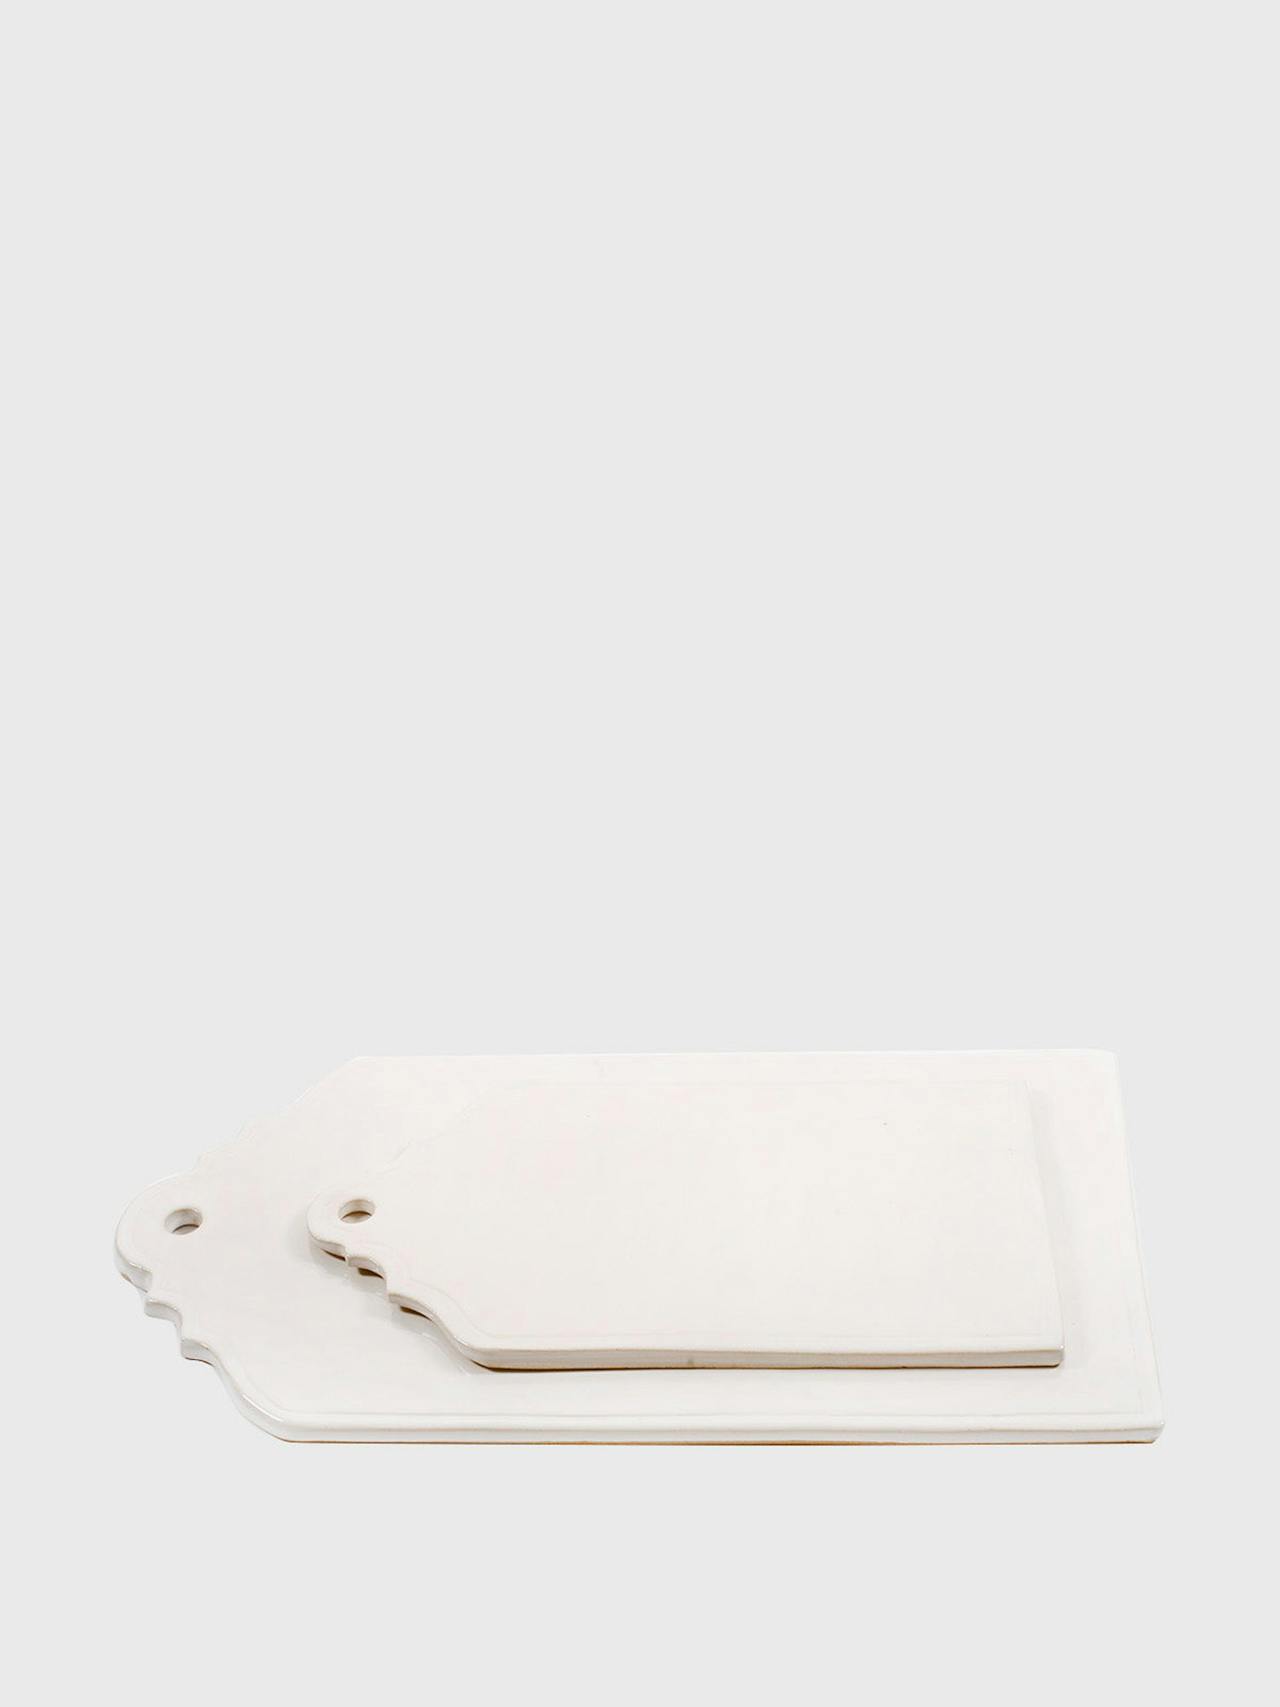 Inspired by the architectural silhouettes of the gables of Montagu, South Africa, these  Hadeda ceramic cheese boards are perfect in their artisan, minimal design. Collagerie.com